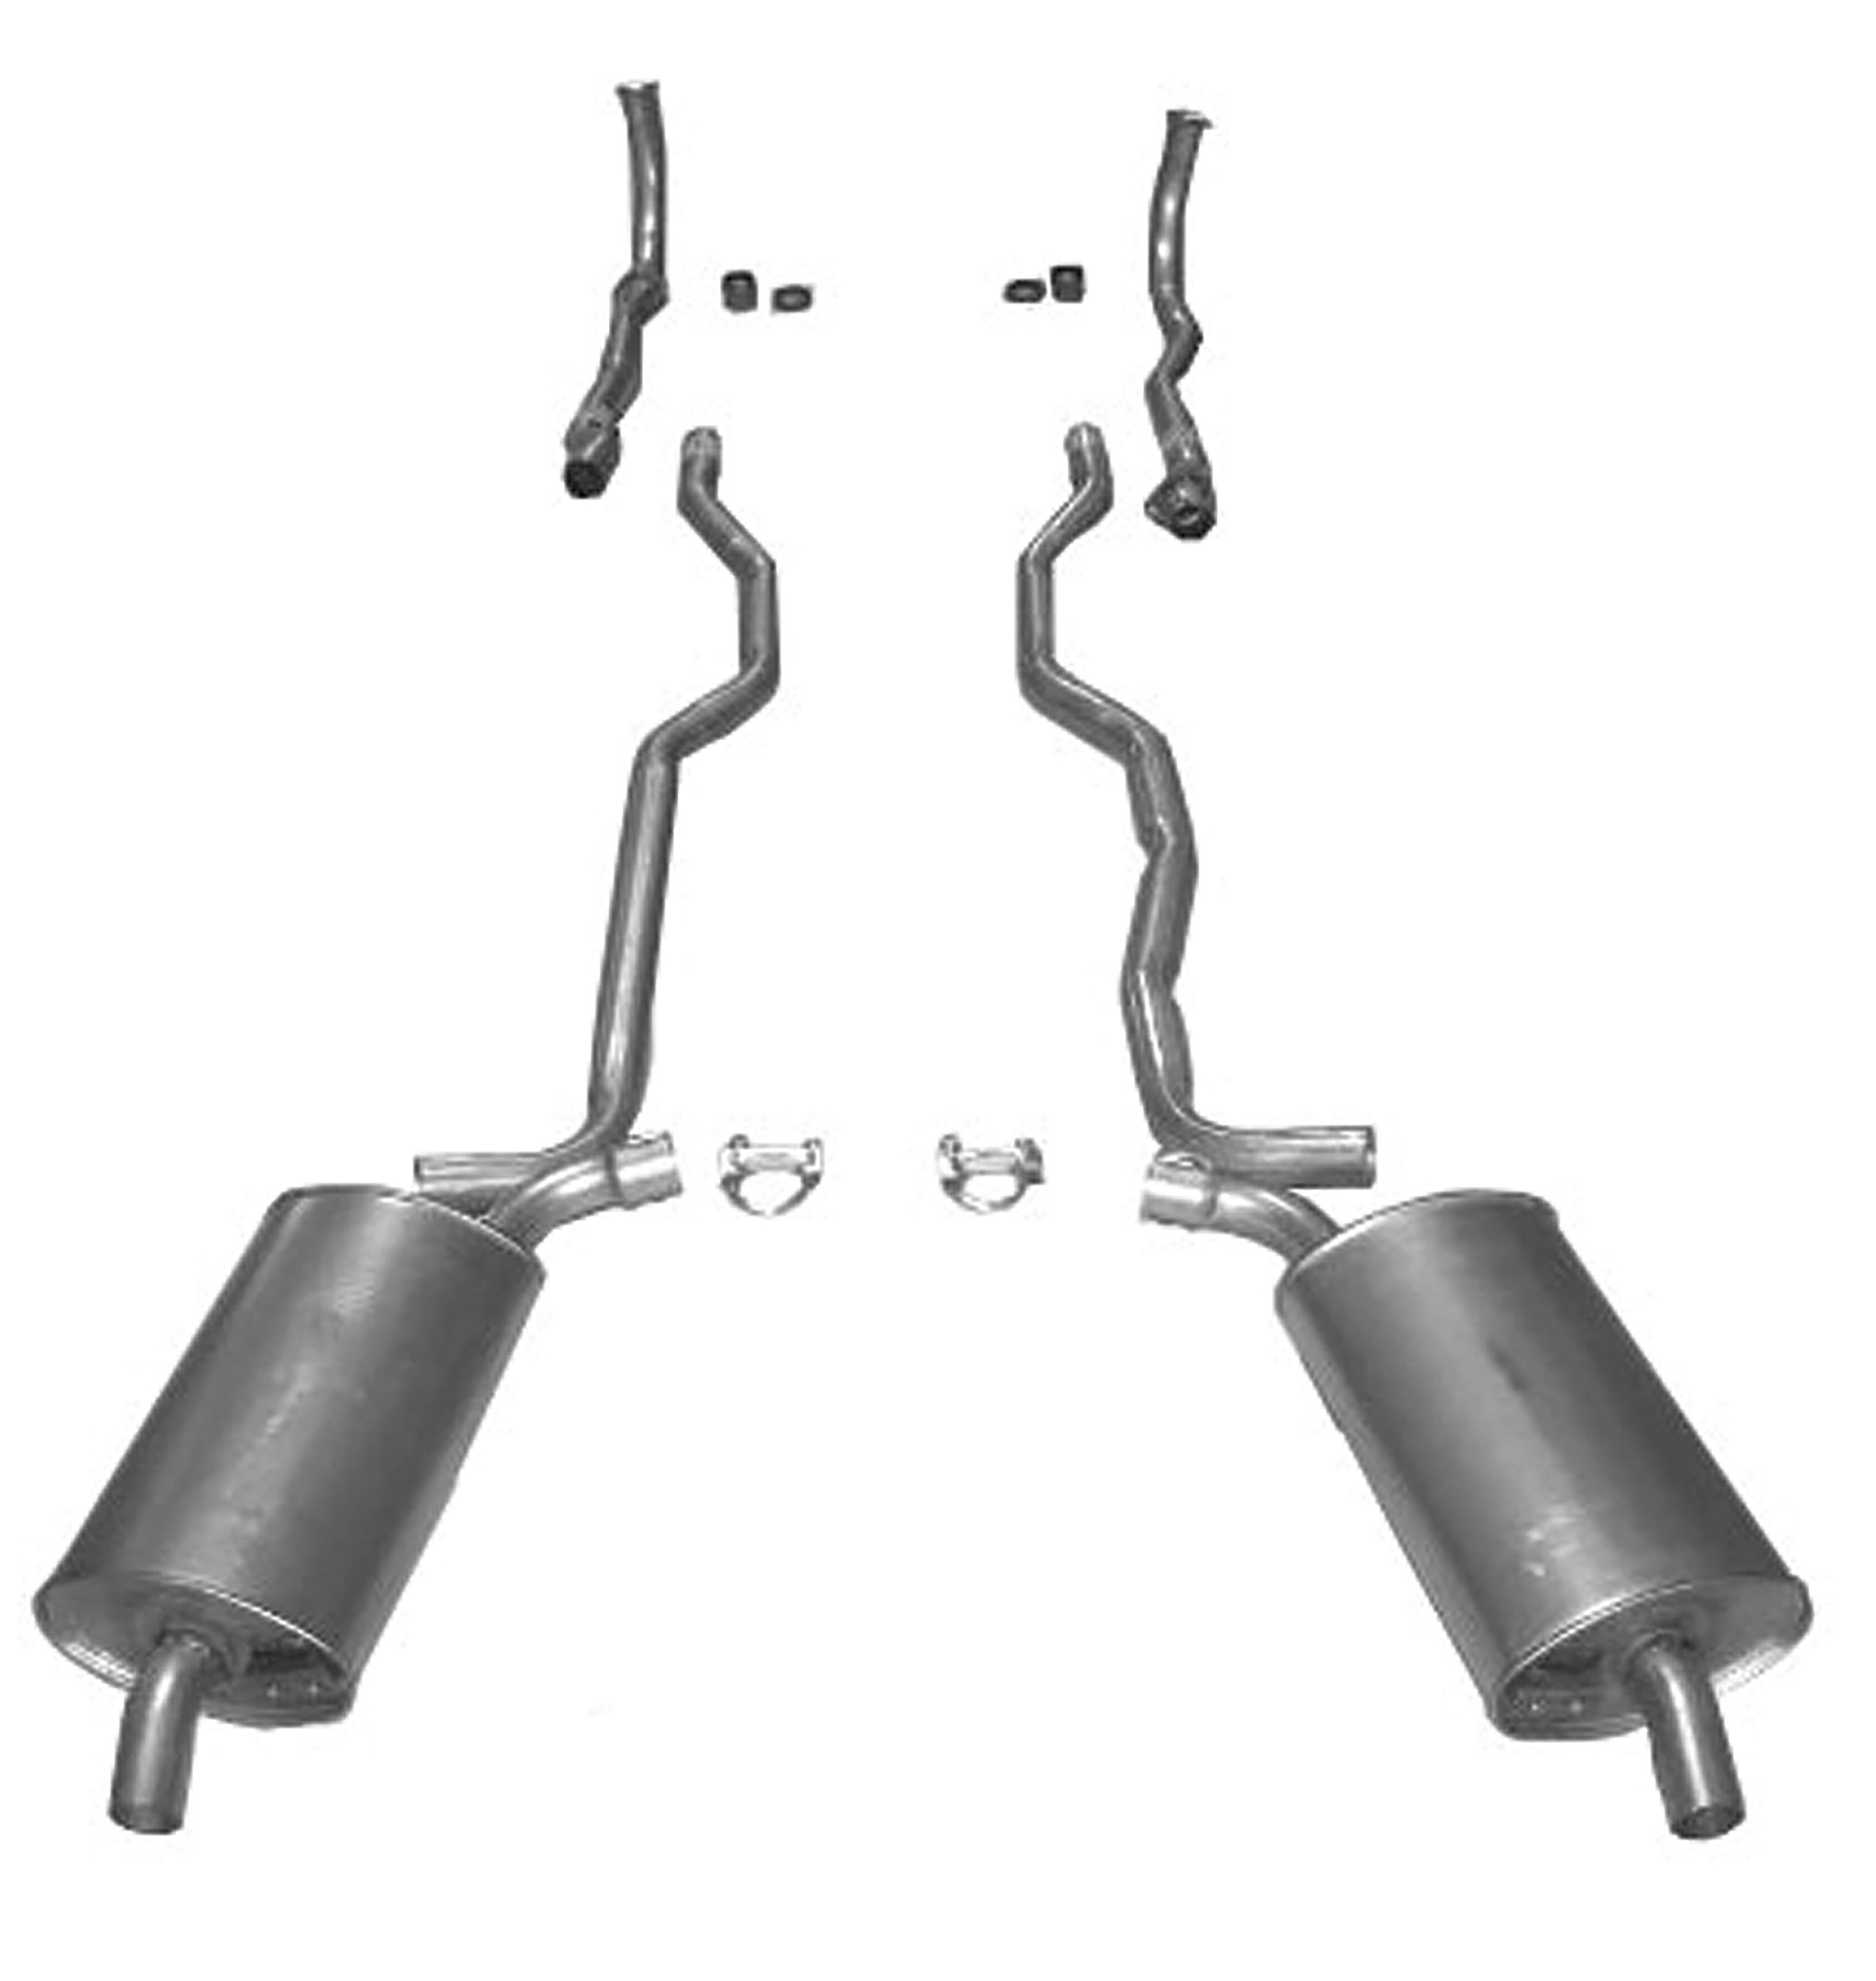 1963 C2 Corvette Exhaust System - 2 Inch - Low HP or Auto W/Separate Secondary Pipe & Muffler